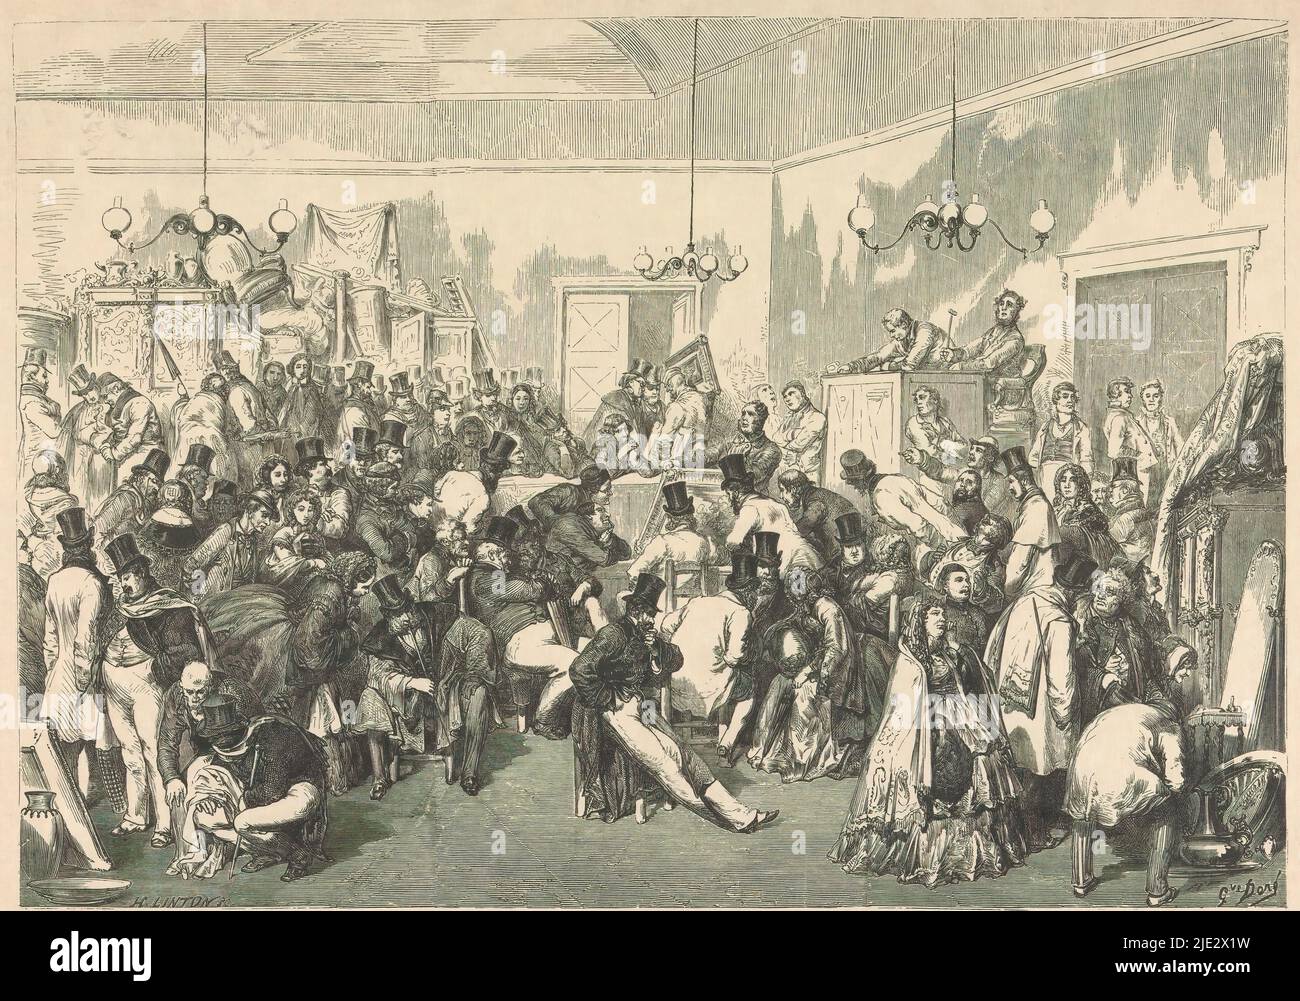 Estate Auction, Interior of an auction room where a crowded estate auction is in progress. On the right on a rise is the auctioneer and an assistant. Standing and seated men and women view the offerings consisting of furniture, paintings and other household goods., print maker: Henry Duff Linton, (mentioned on object), after design by: Gustave Doré, (mentioned on object), 1842 - 1899, paper, height 292 mm × width 401 mm Stock Photo